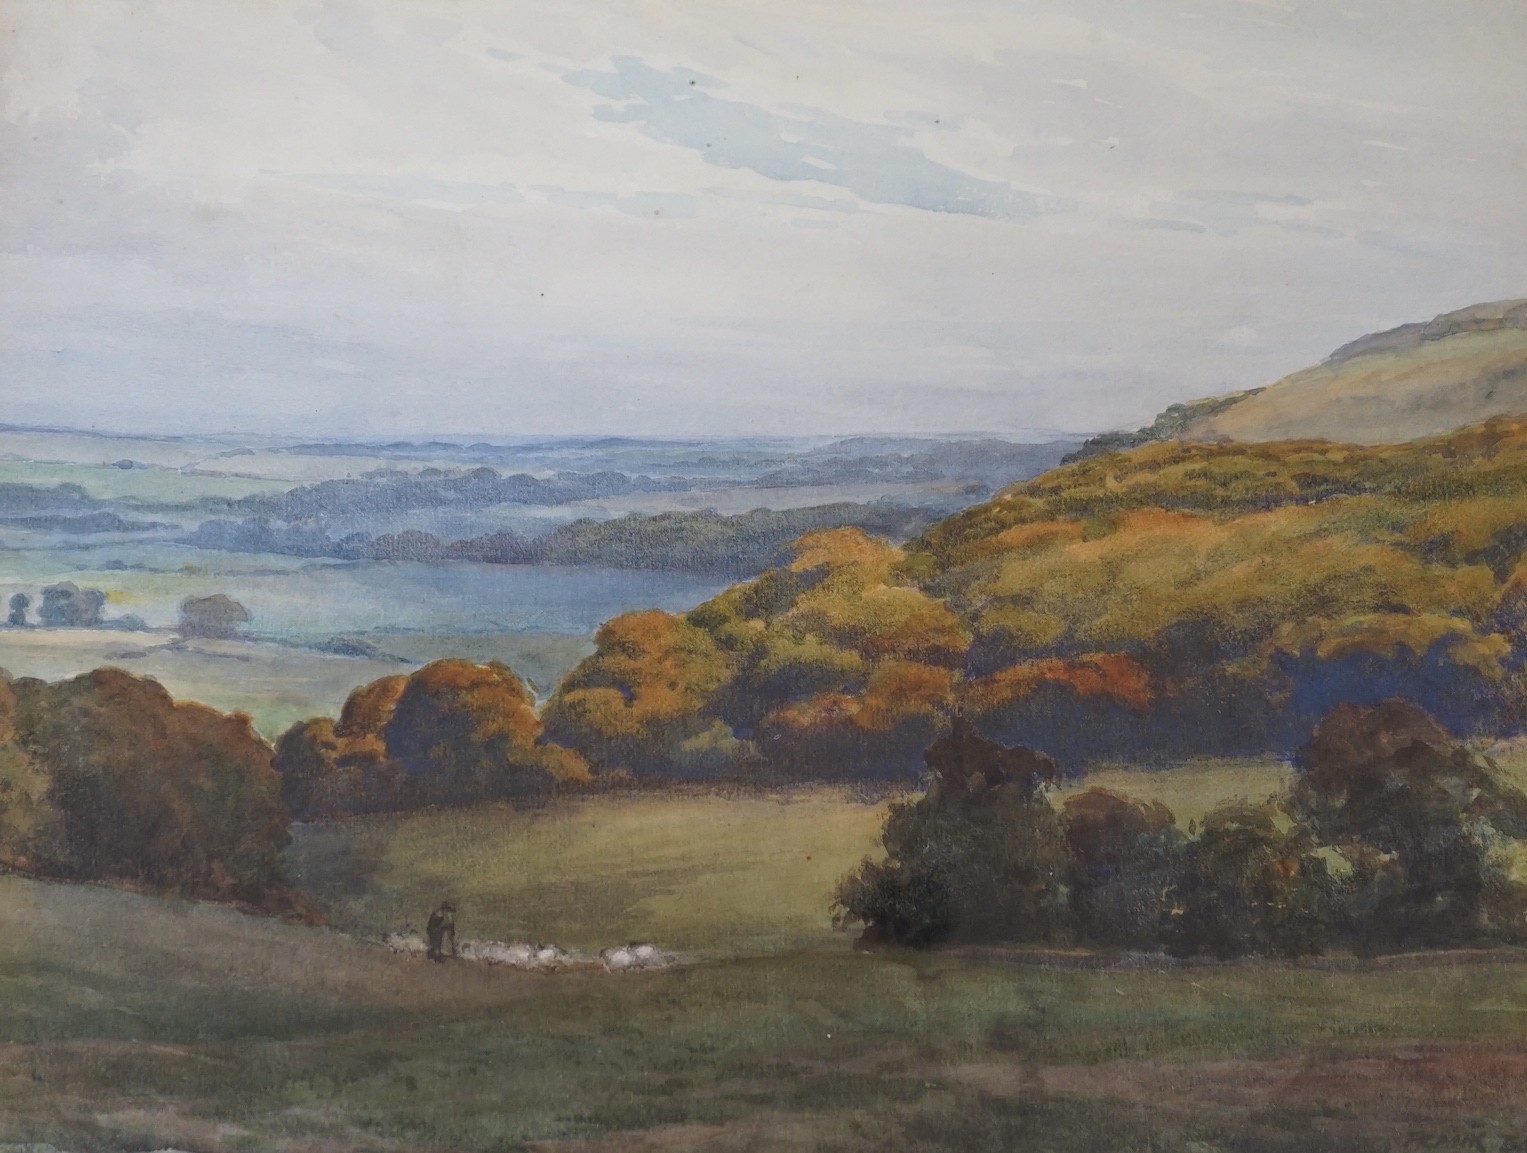 Frank Baker (1873-1941), three watercolours, Sussex landscapes, signed, largest 30 x 39.5cm